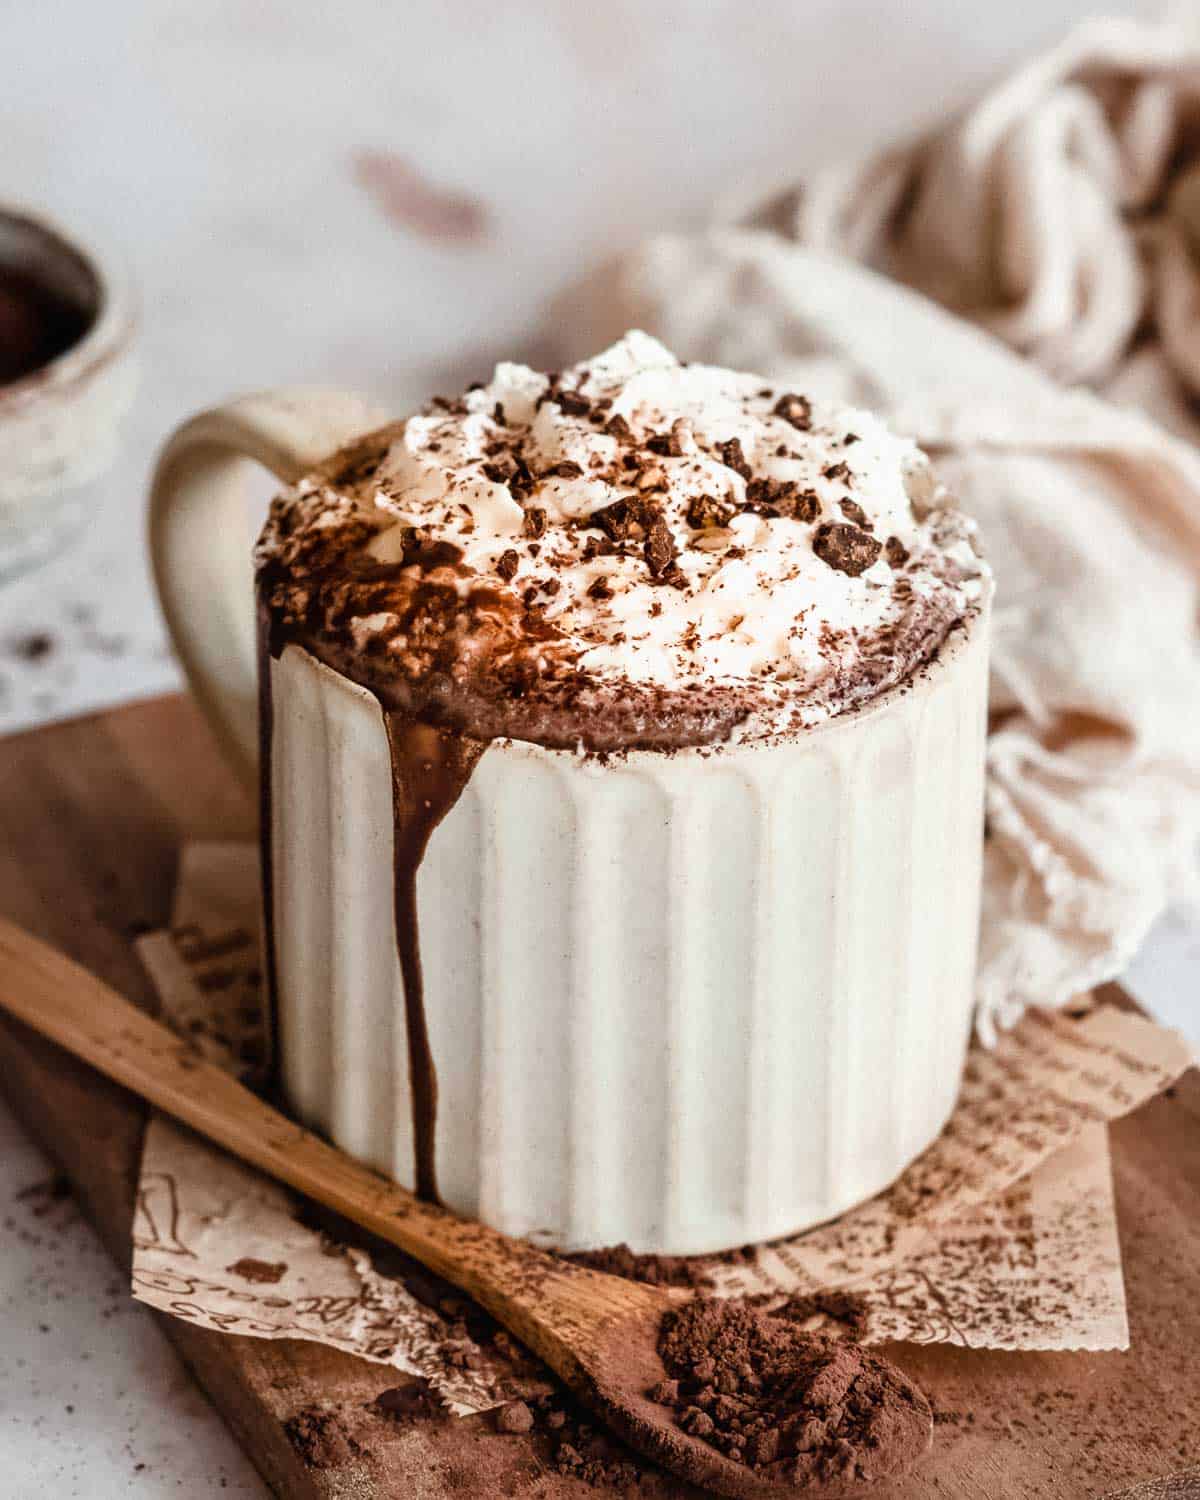 hot chocolate topped with whipped cream and cocoa powder.